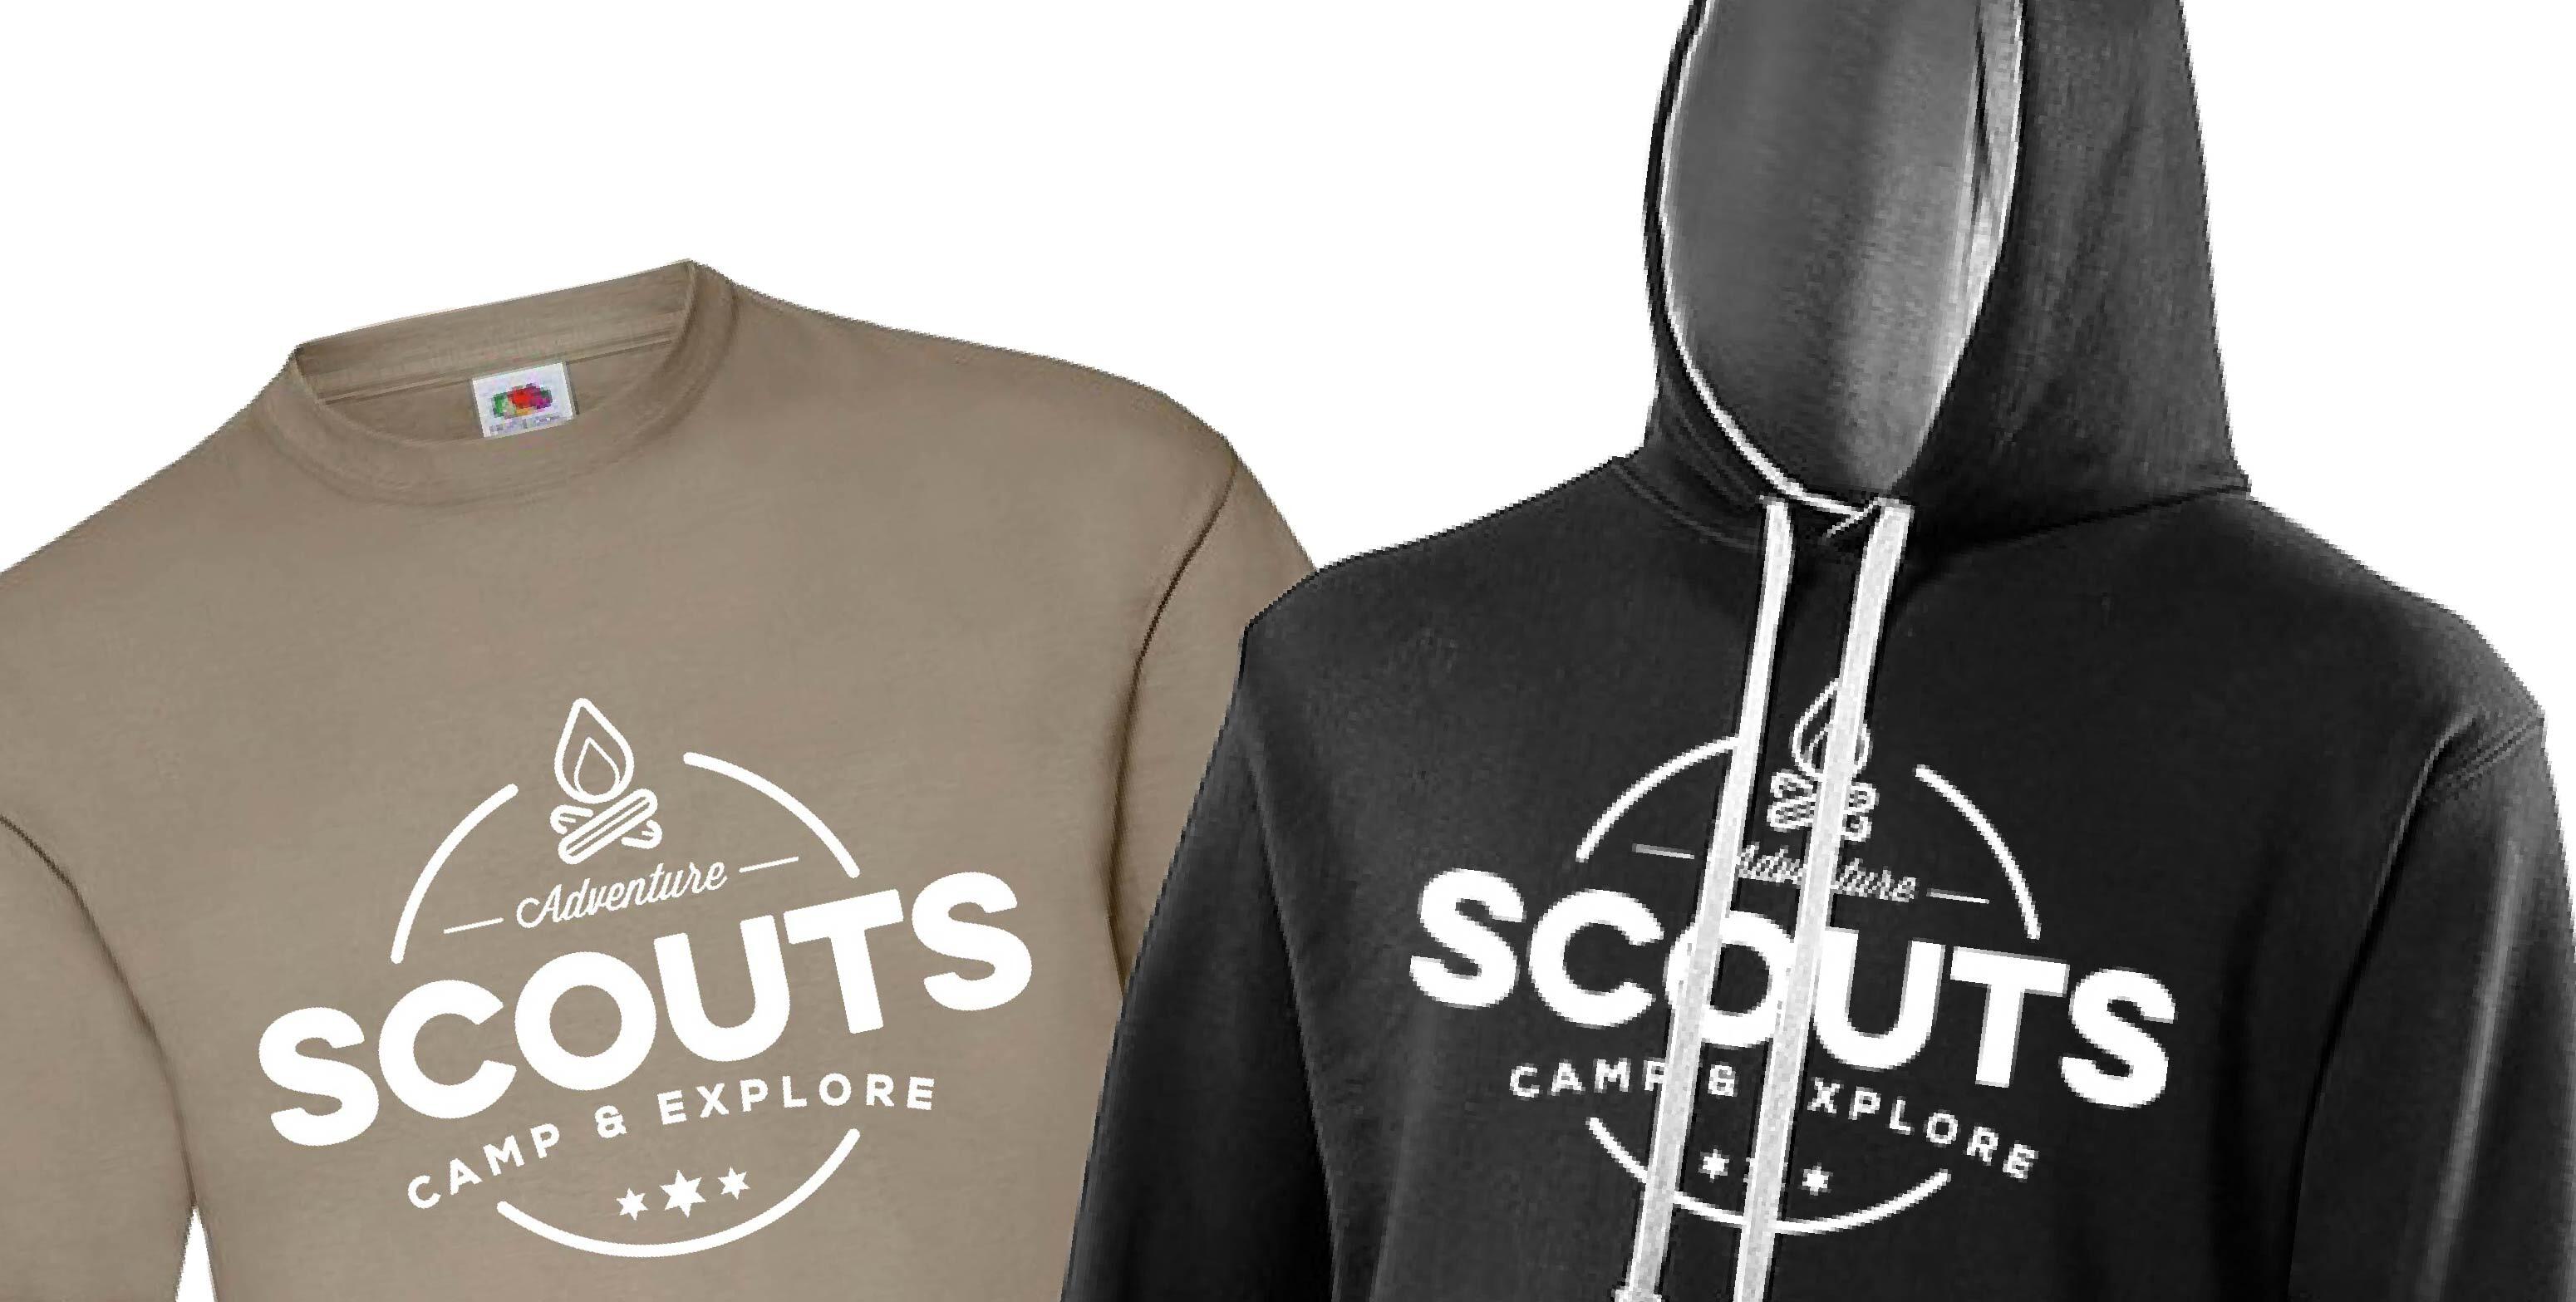 Scout Camp & Explore (Adult Sizing)